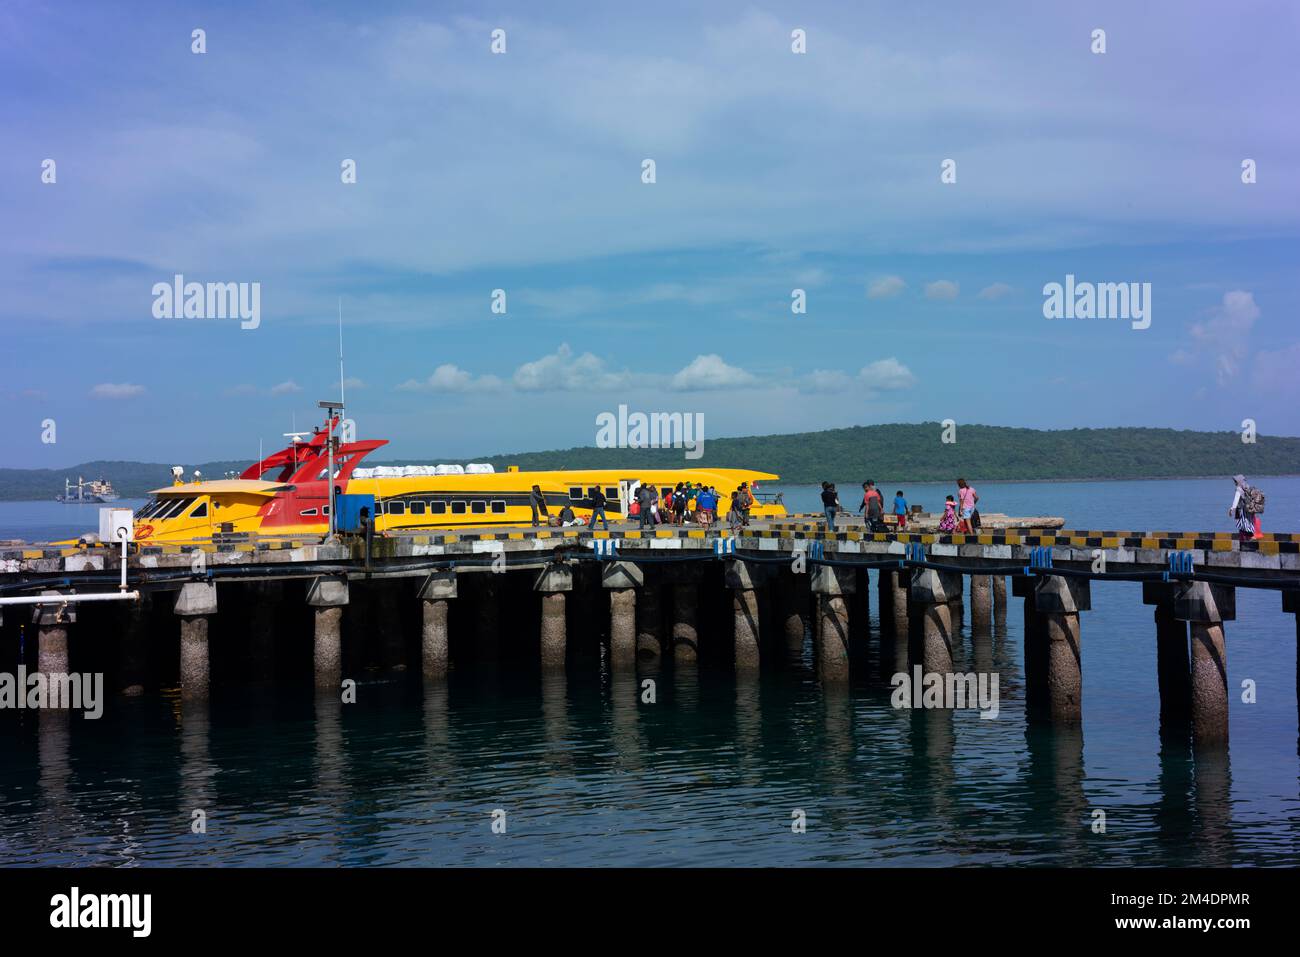 The ferry taking people from Kupang to Rote. Stock Photo